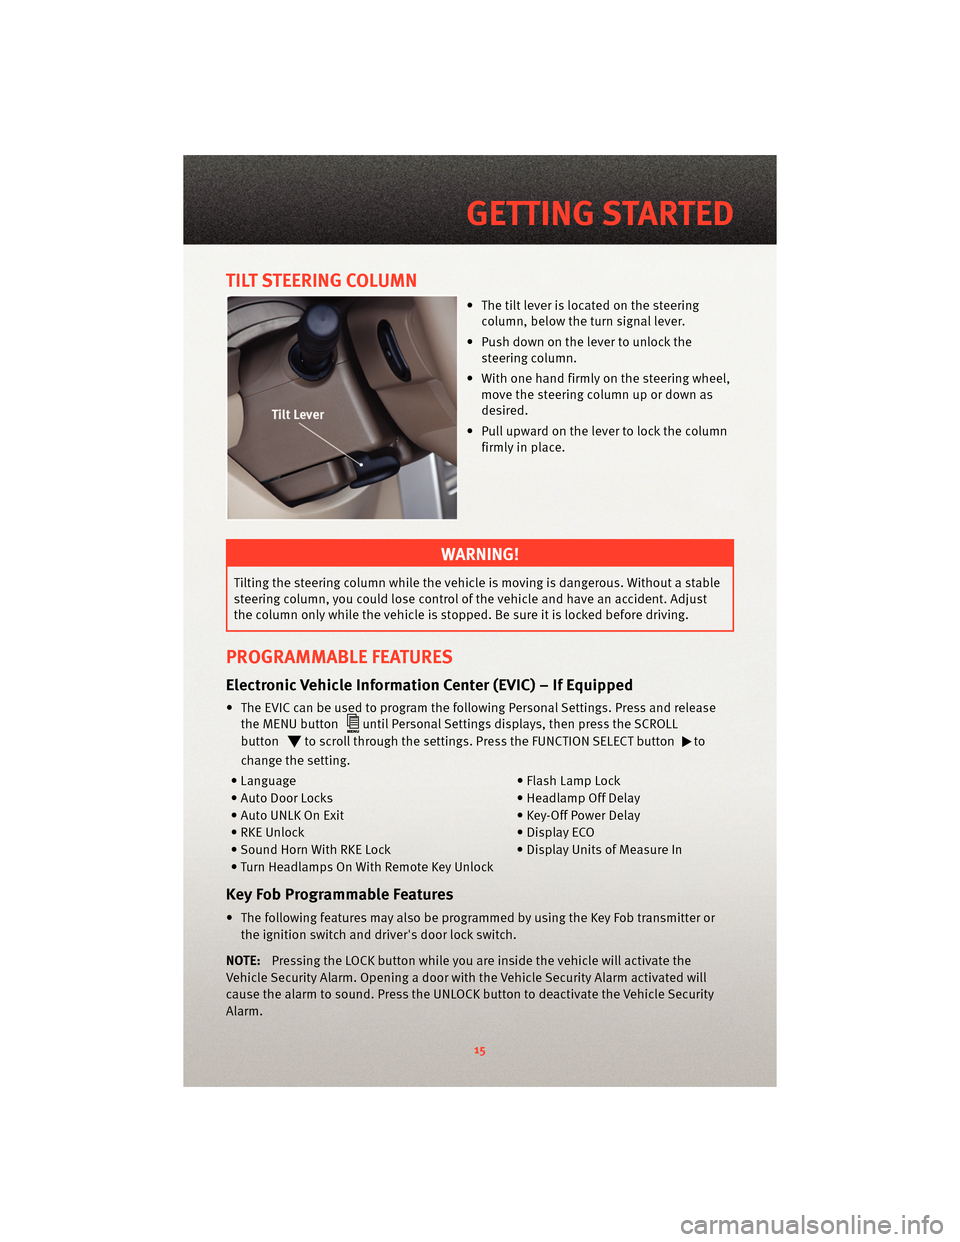 DODGE NITRO 2010 1.G User Guide TILT STEERING COLUMN
• The tilt lever is located on the steeringcolumn, below the turn signal lever.
• Push down on the lever to unlock the steering column.
• With one hand firmly on the steerin